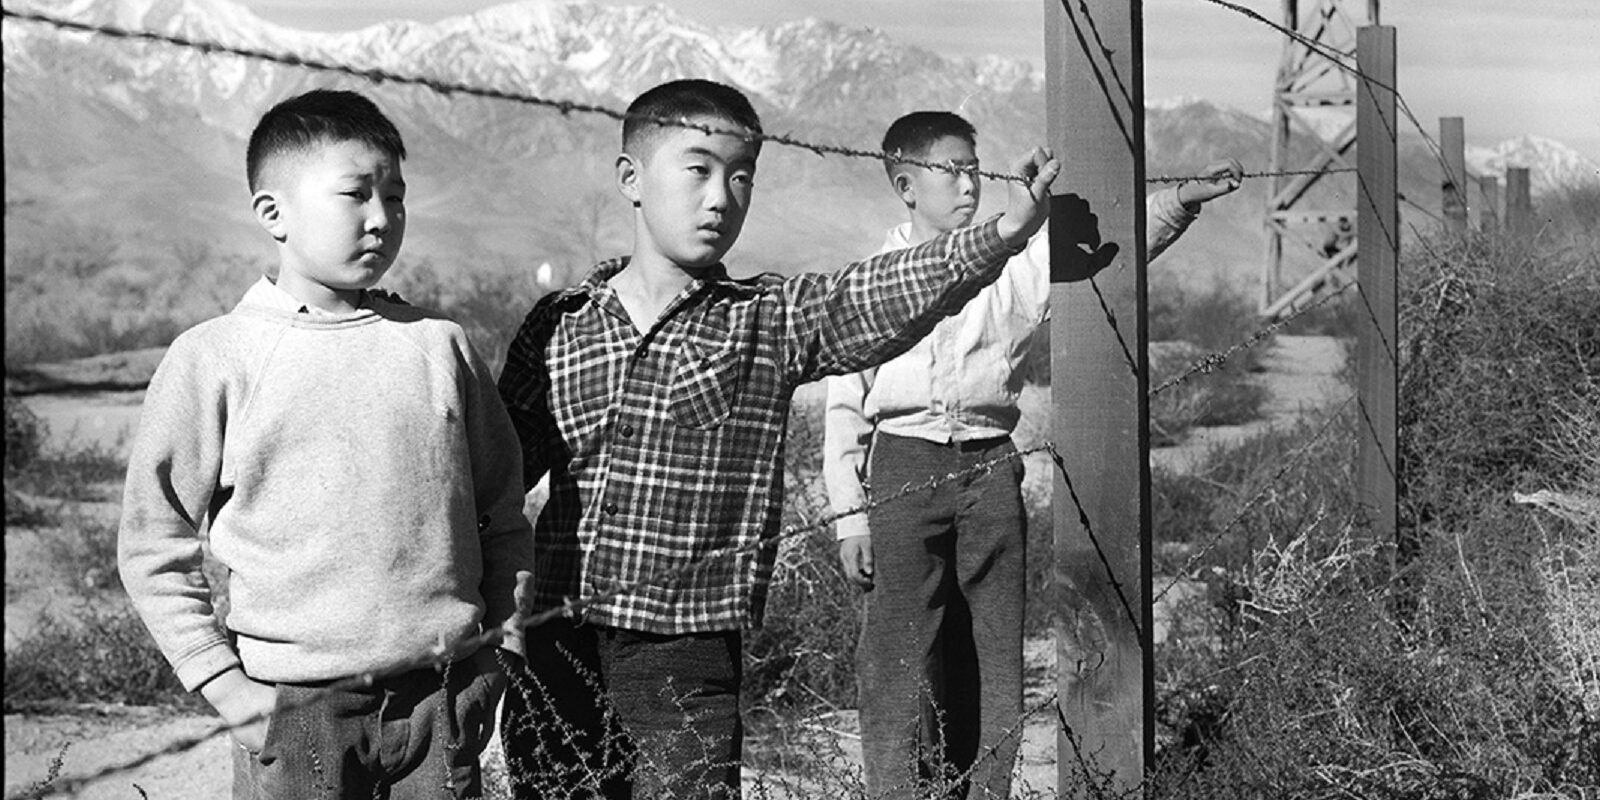 The Three Boys Behind Barbed Wire (Year unknown)